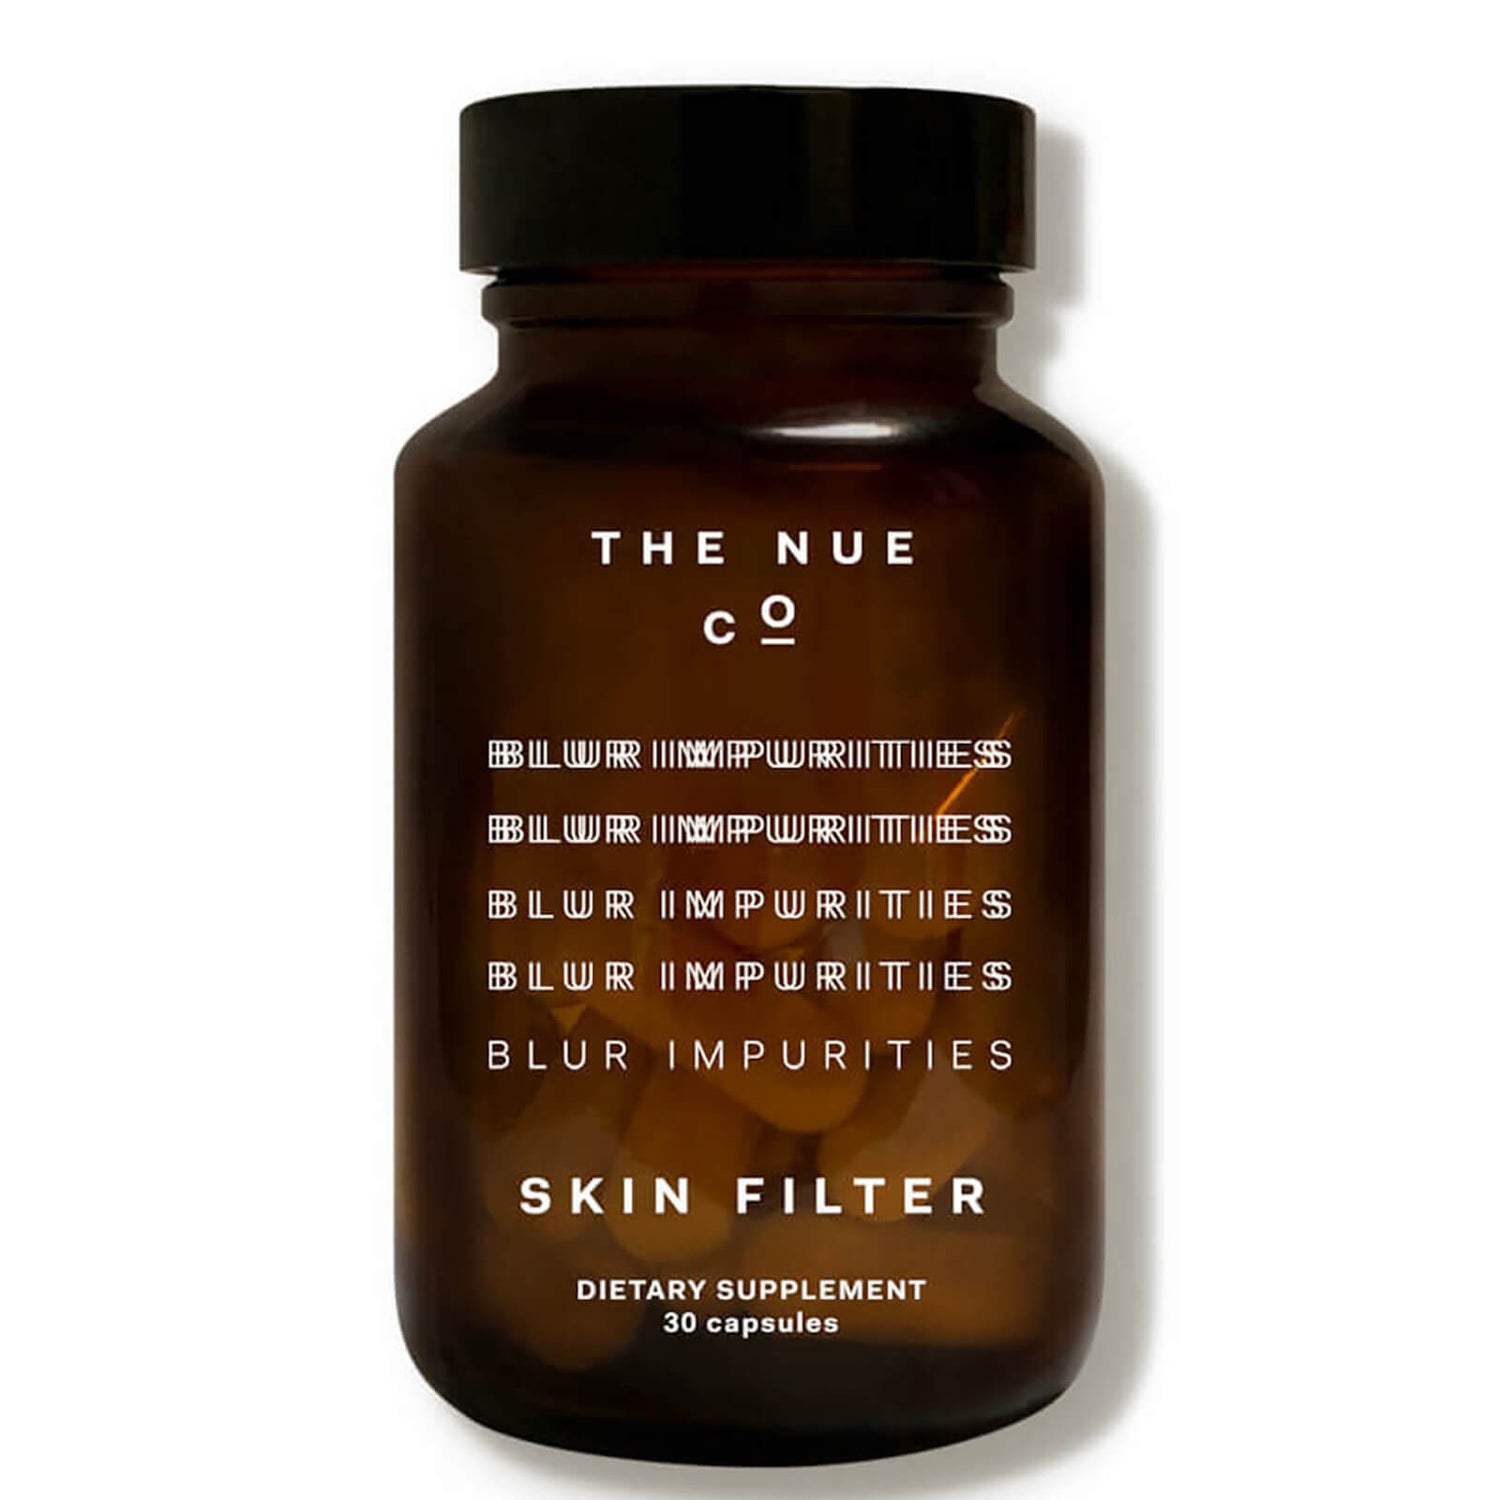 The Nue Co. Skin Filter (30 capsules)